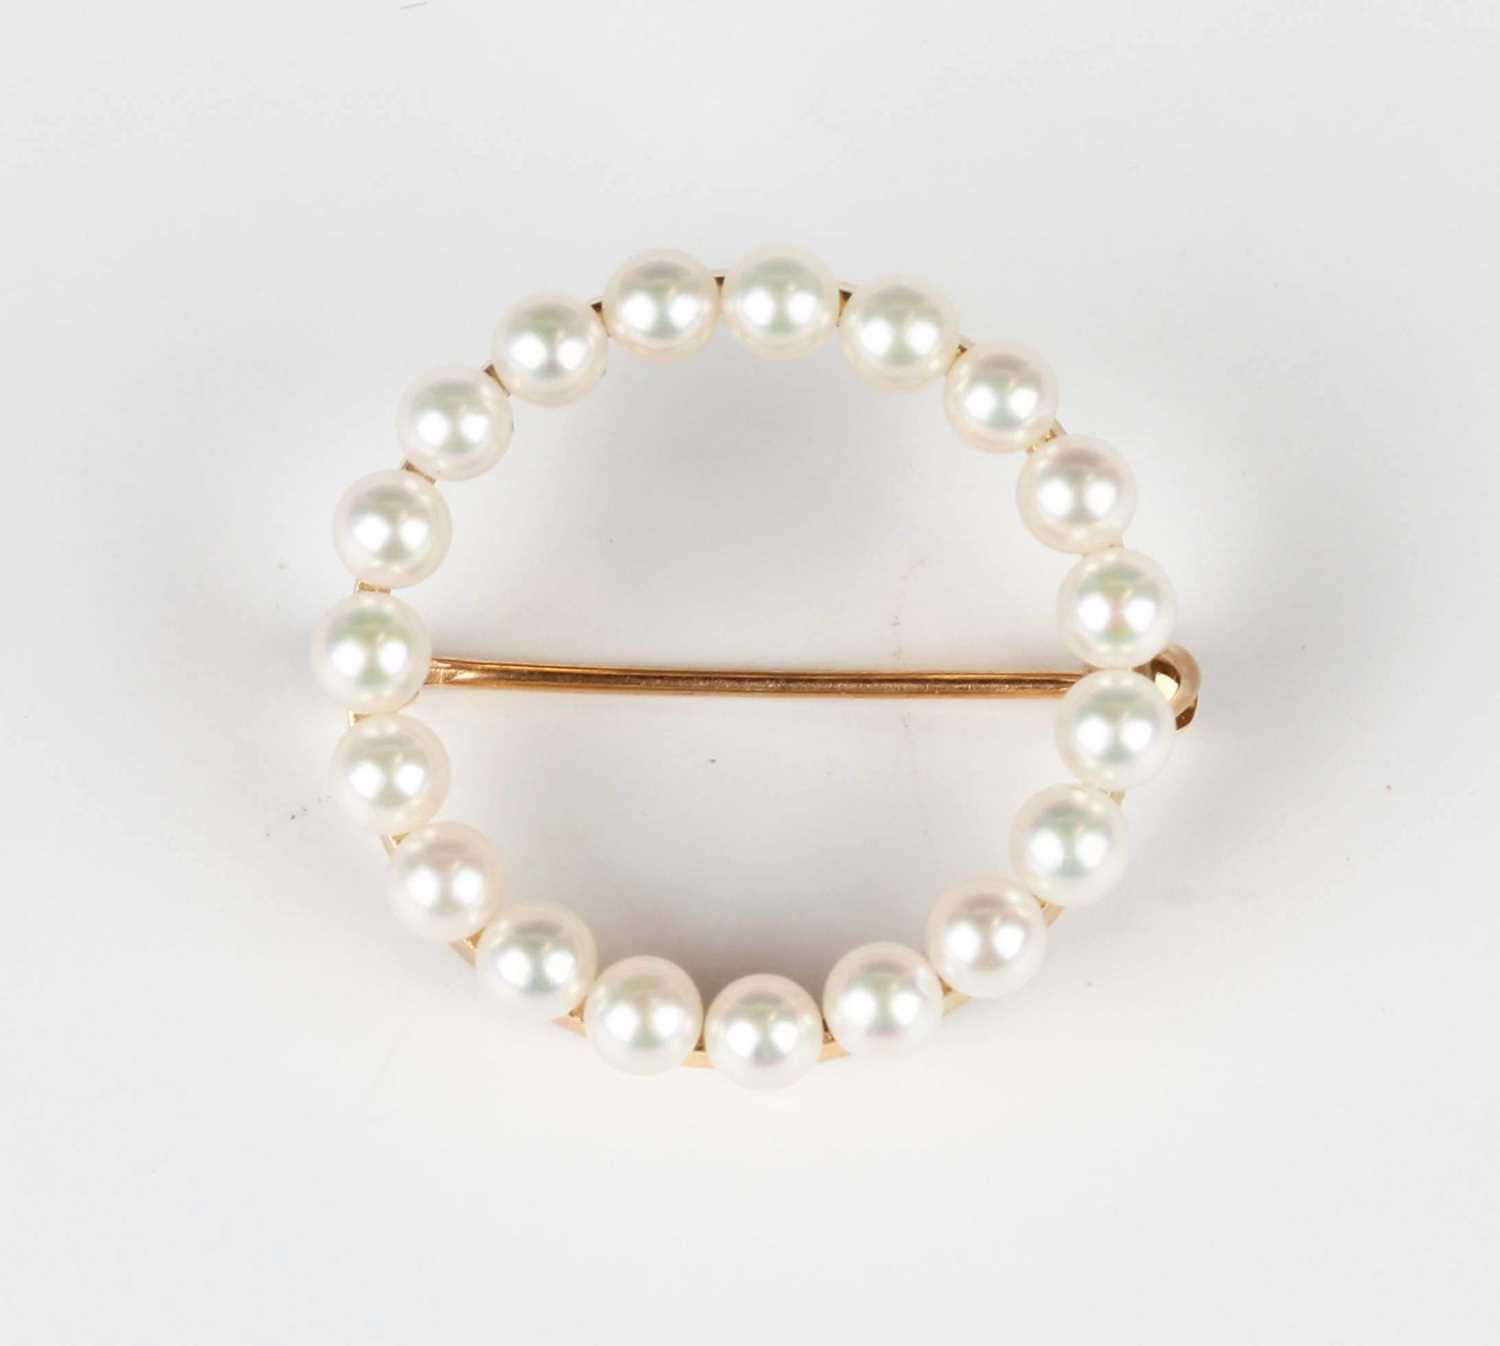 A gold and cultured pearl brooch in a circular design, detailed '14K', weight 2.5g, diameter 2.1cm.